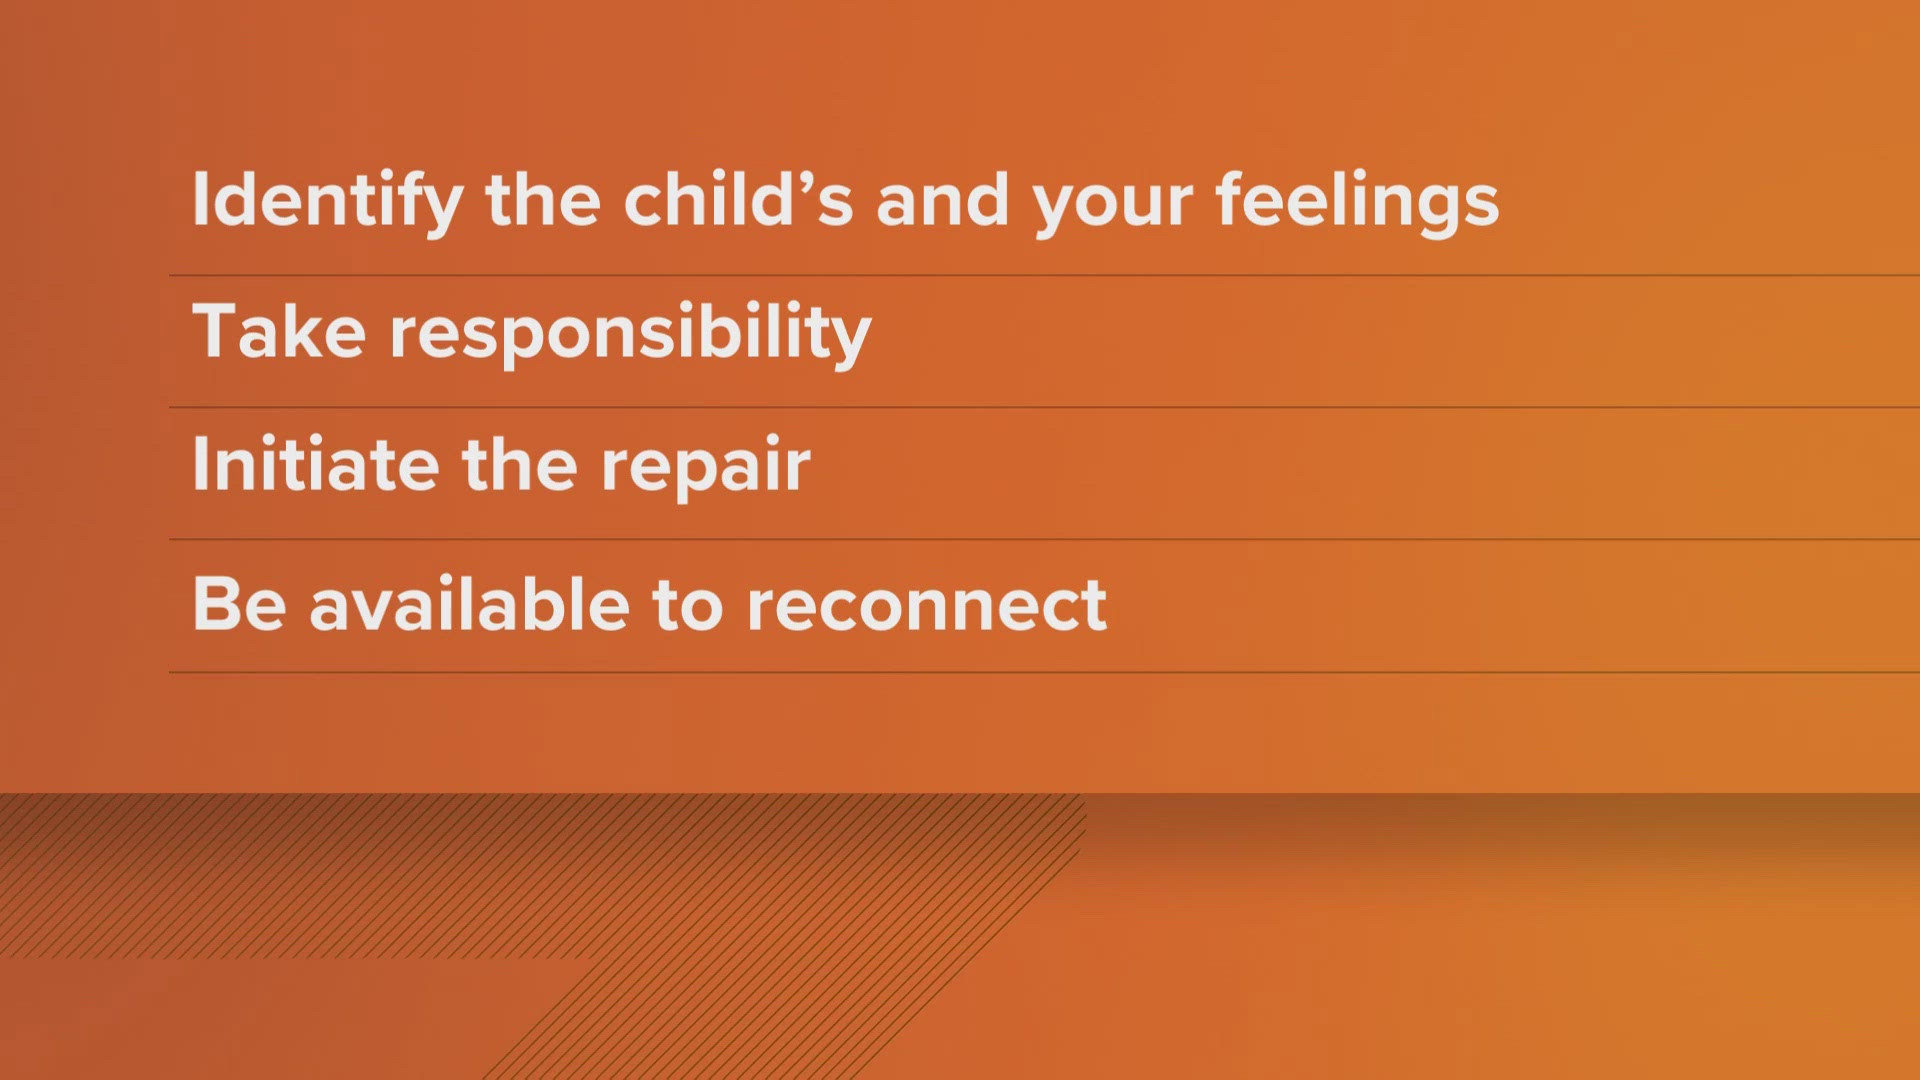 Dr. Heather Hans discusses how feeling safe and secure can impact a child's development, and what parents can do to help repair mistakes that have been made.